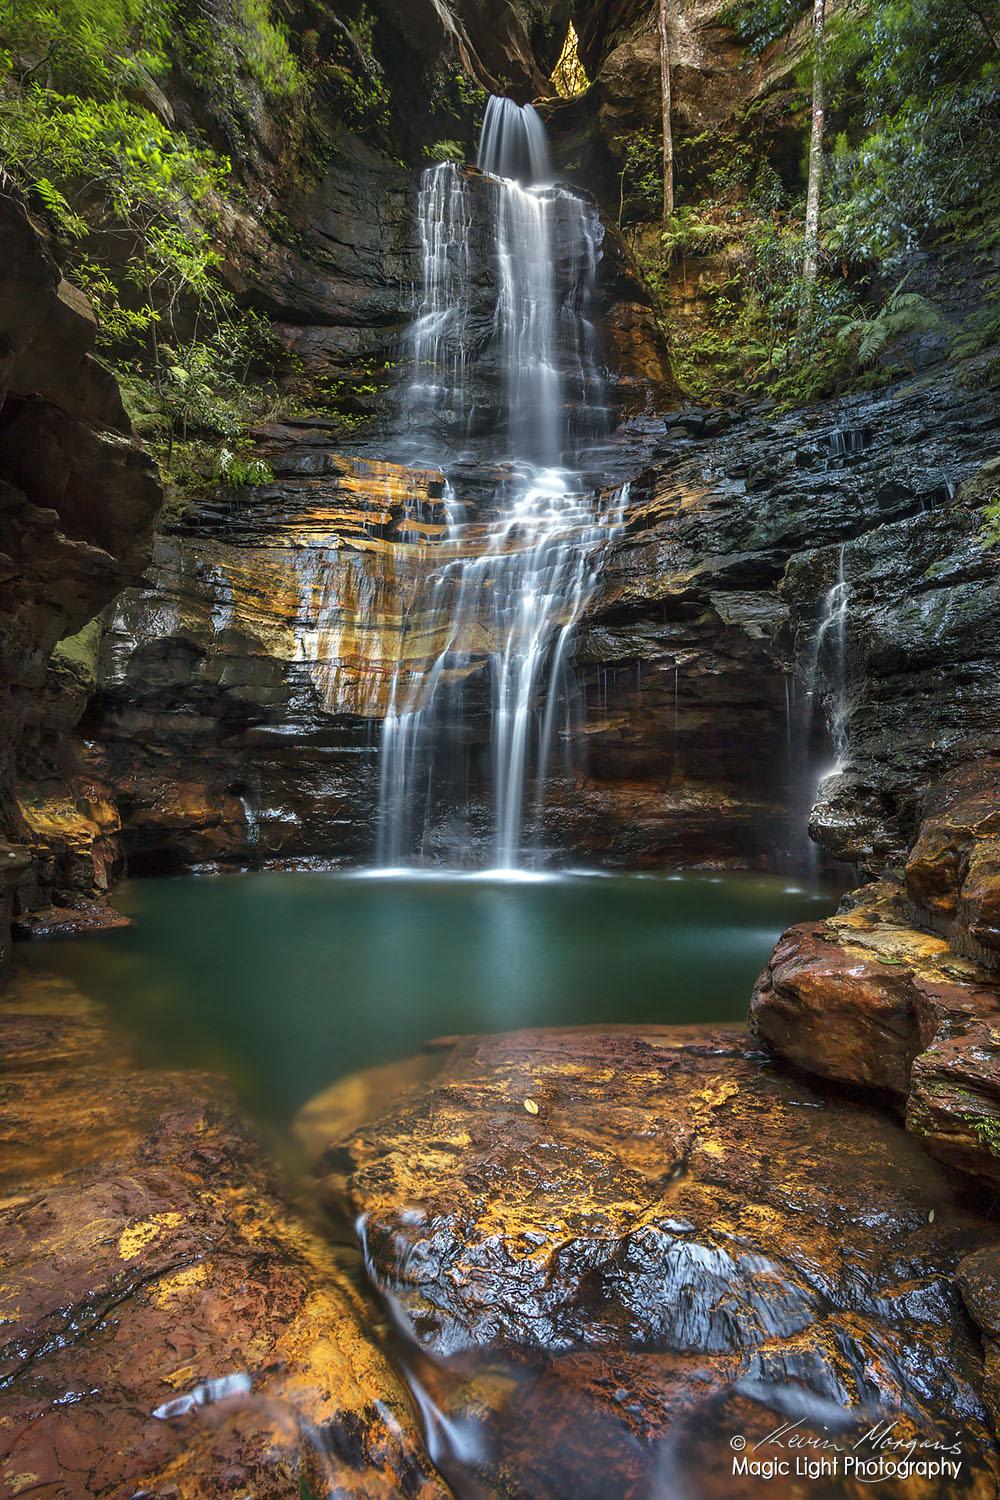 The stunning Empress Falls in The Valley Of The Waters in the Blue Mountains, New South Wales, Australia. Taken in early July of this year.